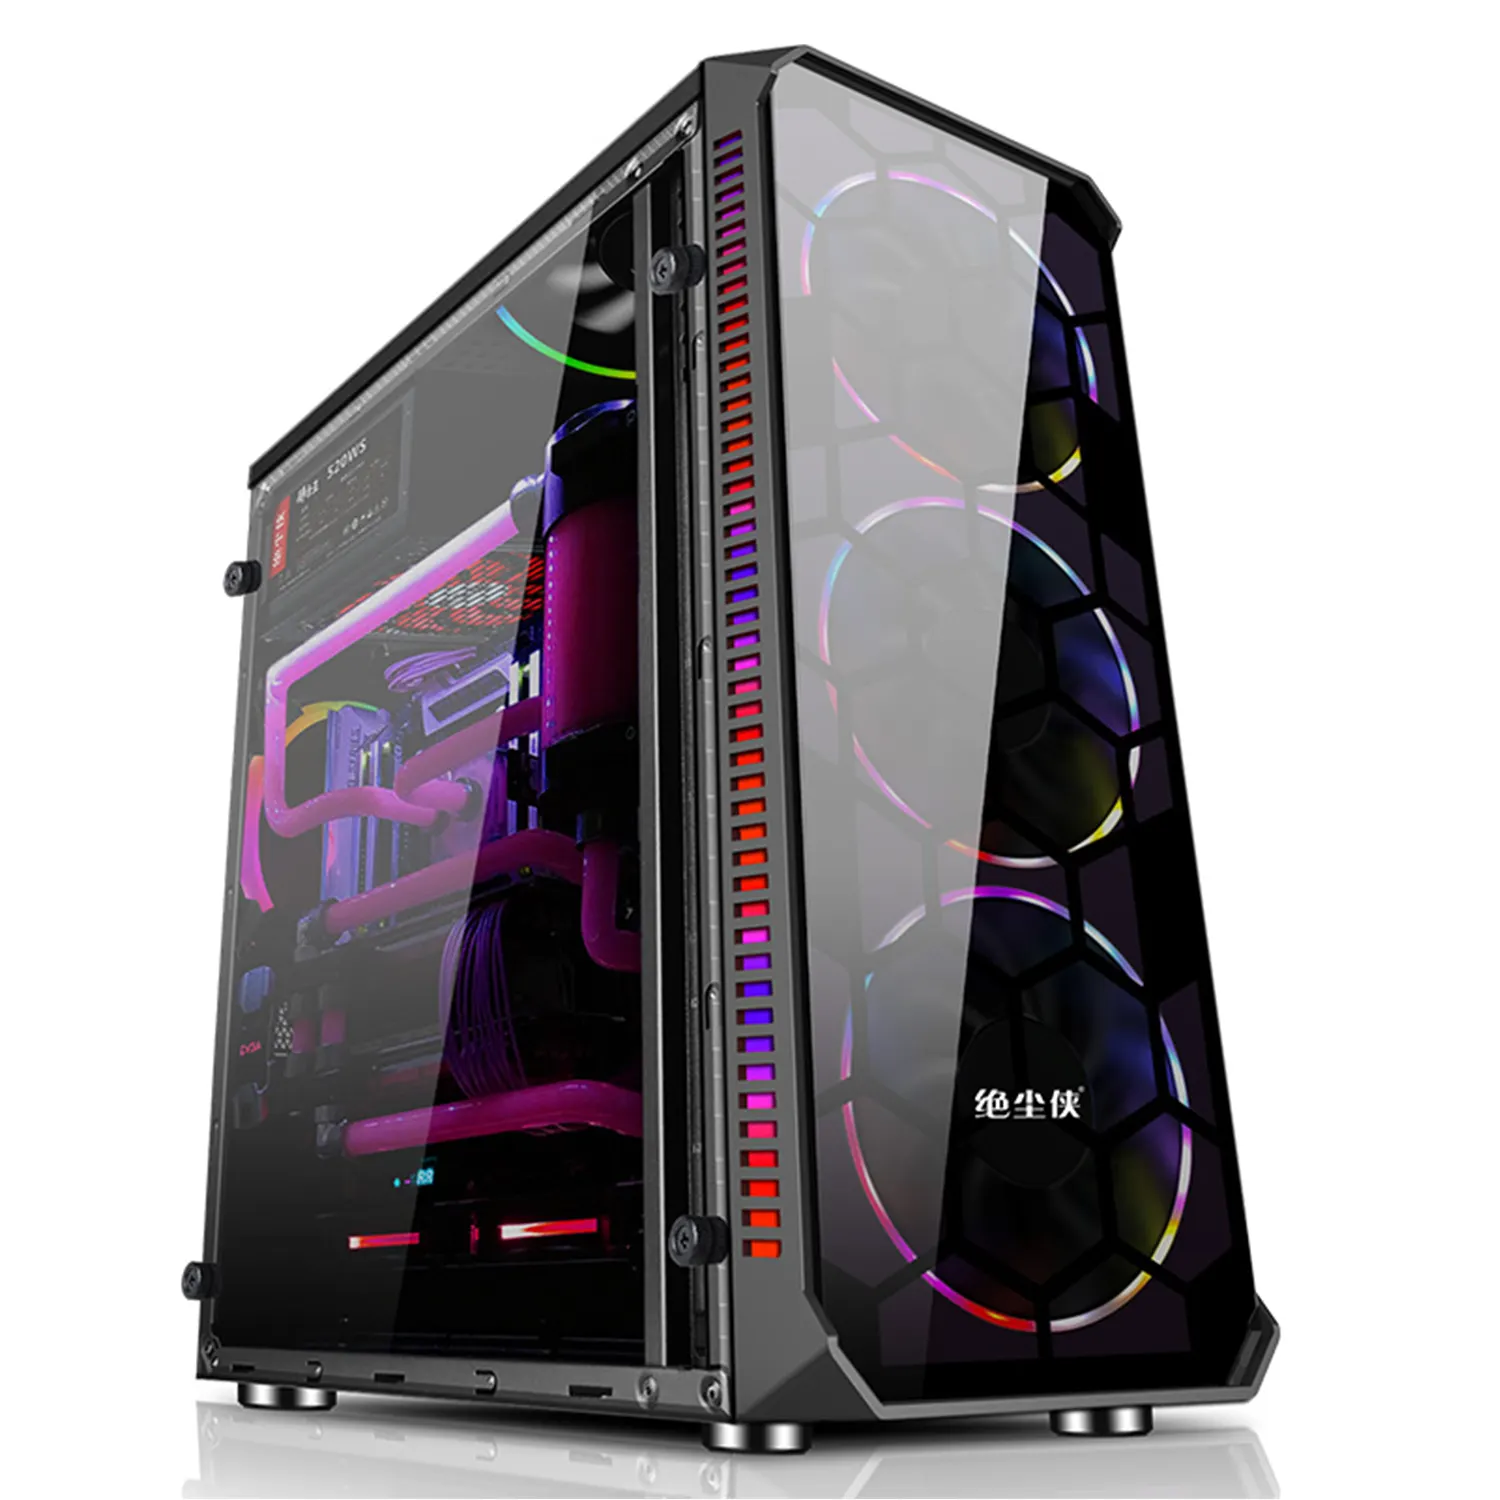 Hot Different Host Scheme Configurations Gaming r Hardware Atx Gaming PC Case And Tower Desktop Compute